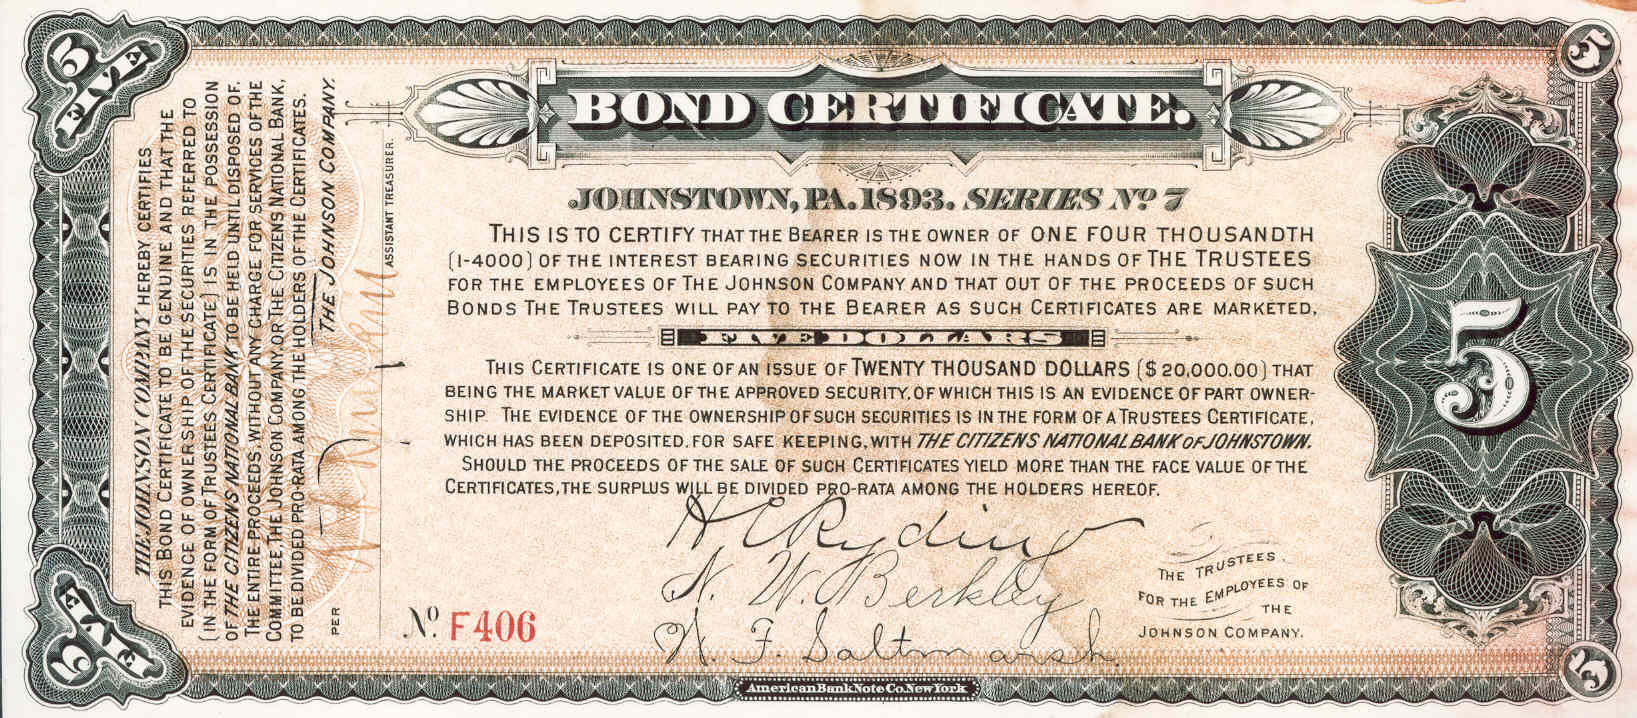 Old bond certificate example